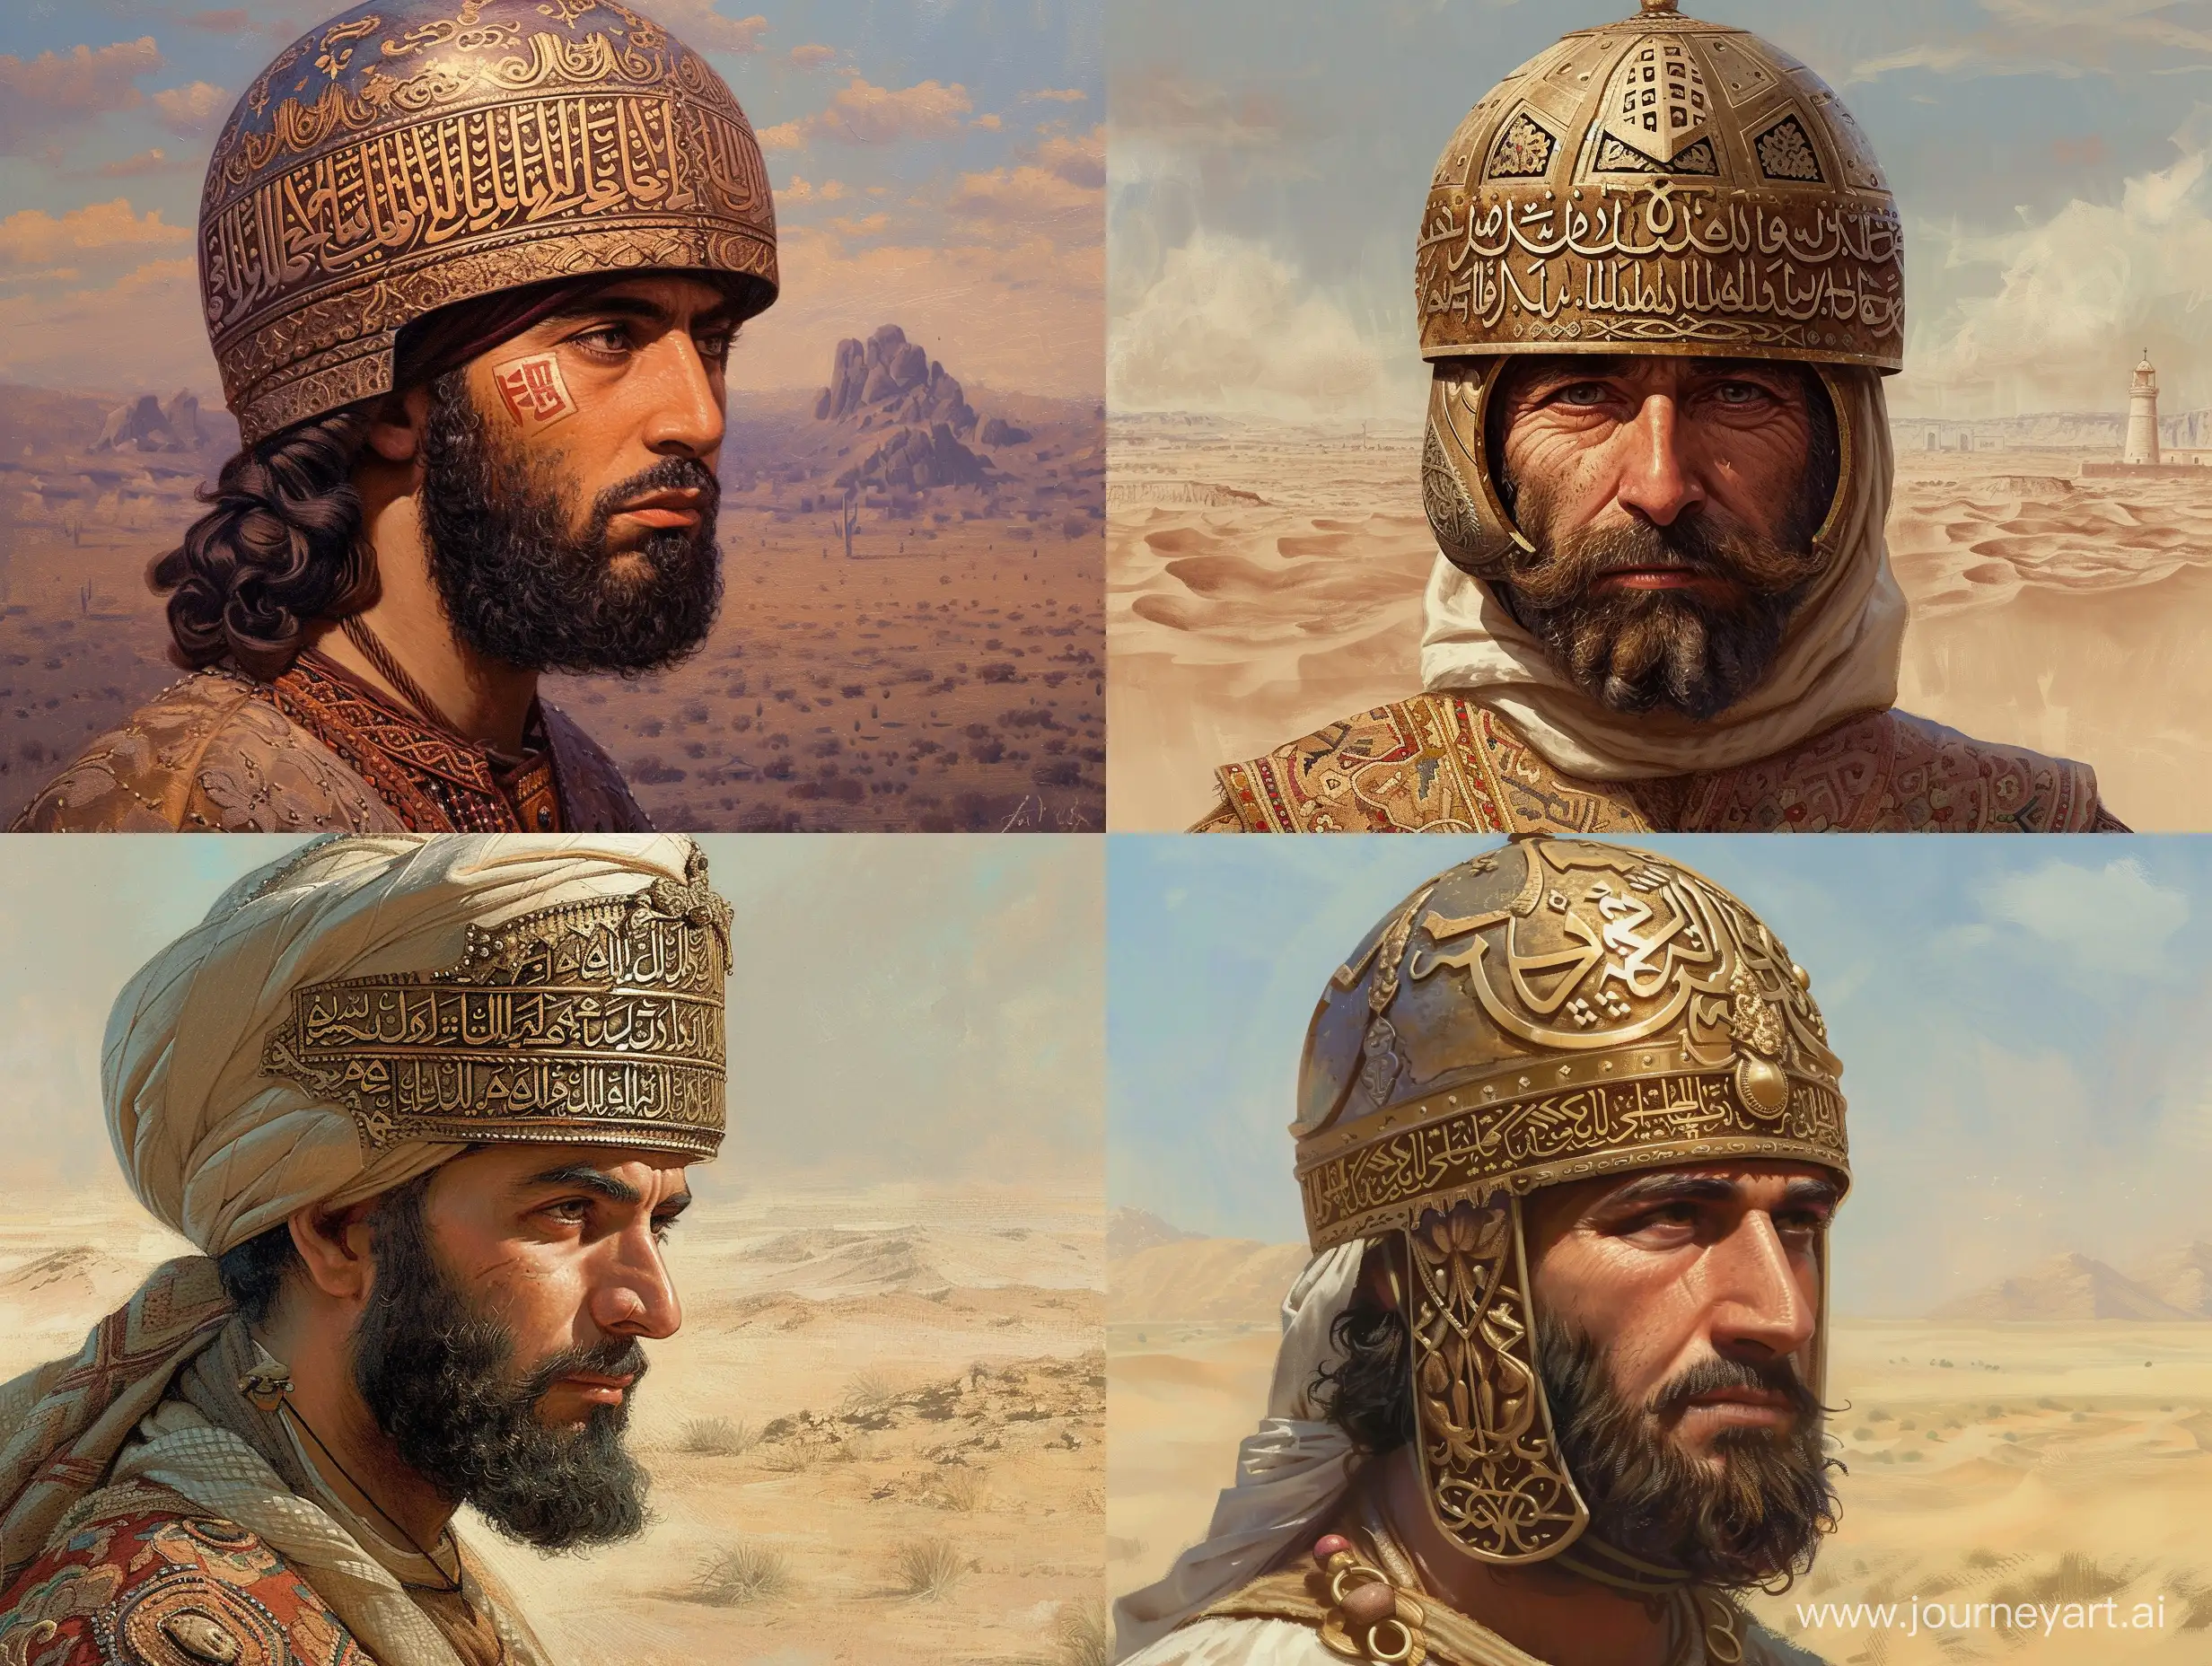 Portrait of an Iranian man, with a little thick van dyke beard, wearing an ottoman helmet with intricate arabic carvings. The background is a desert